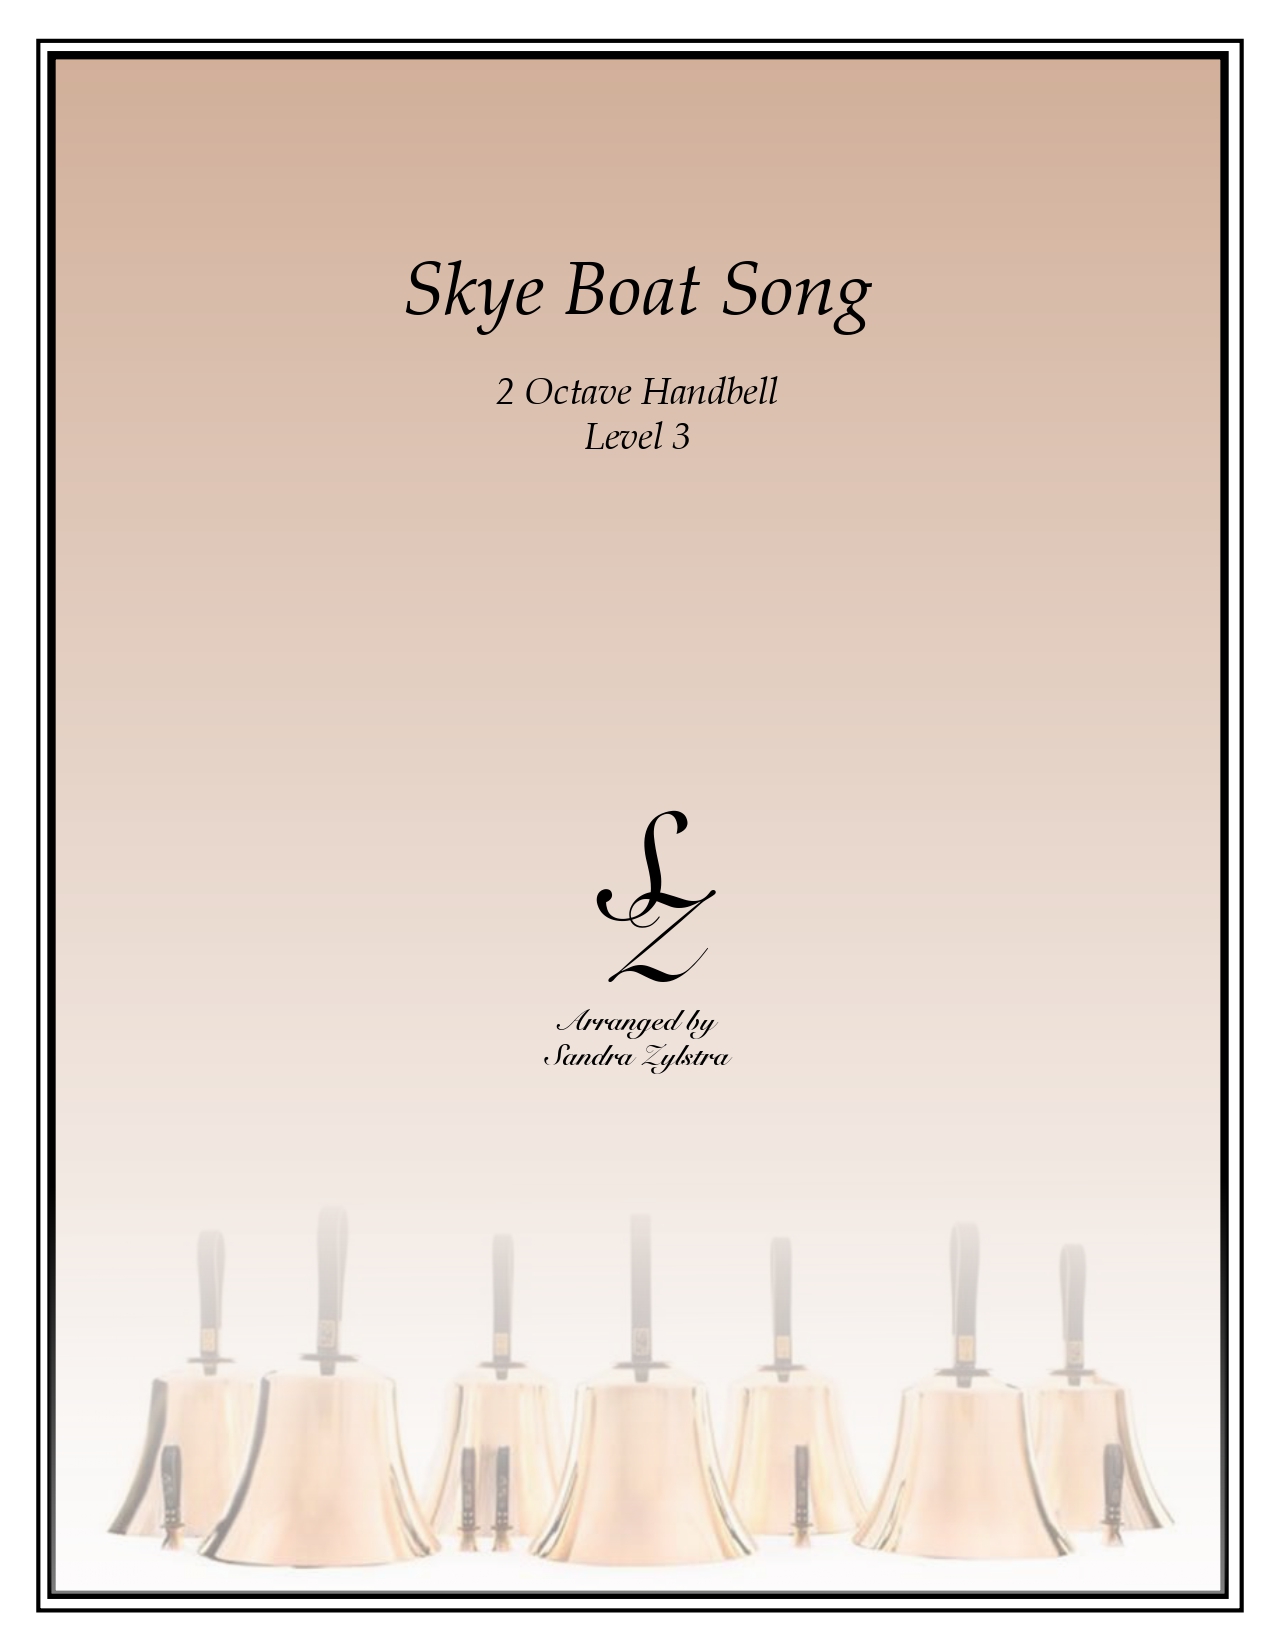 Skye Boat Song 2 octave handbells cover page 00011